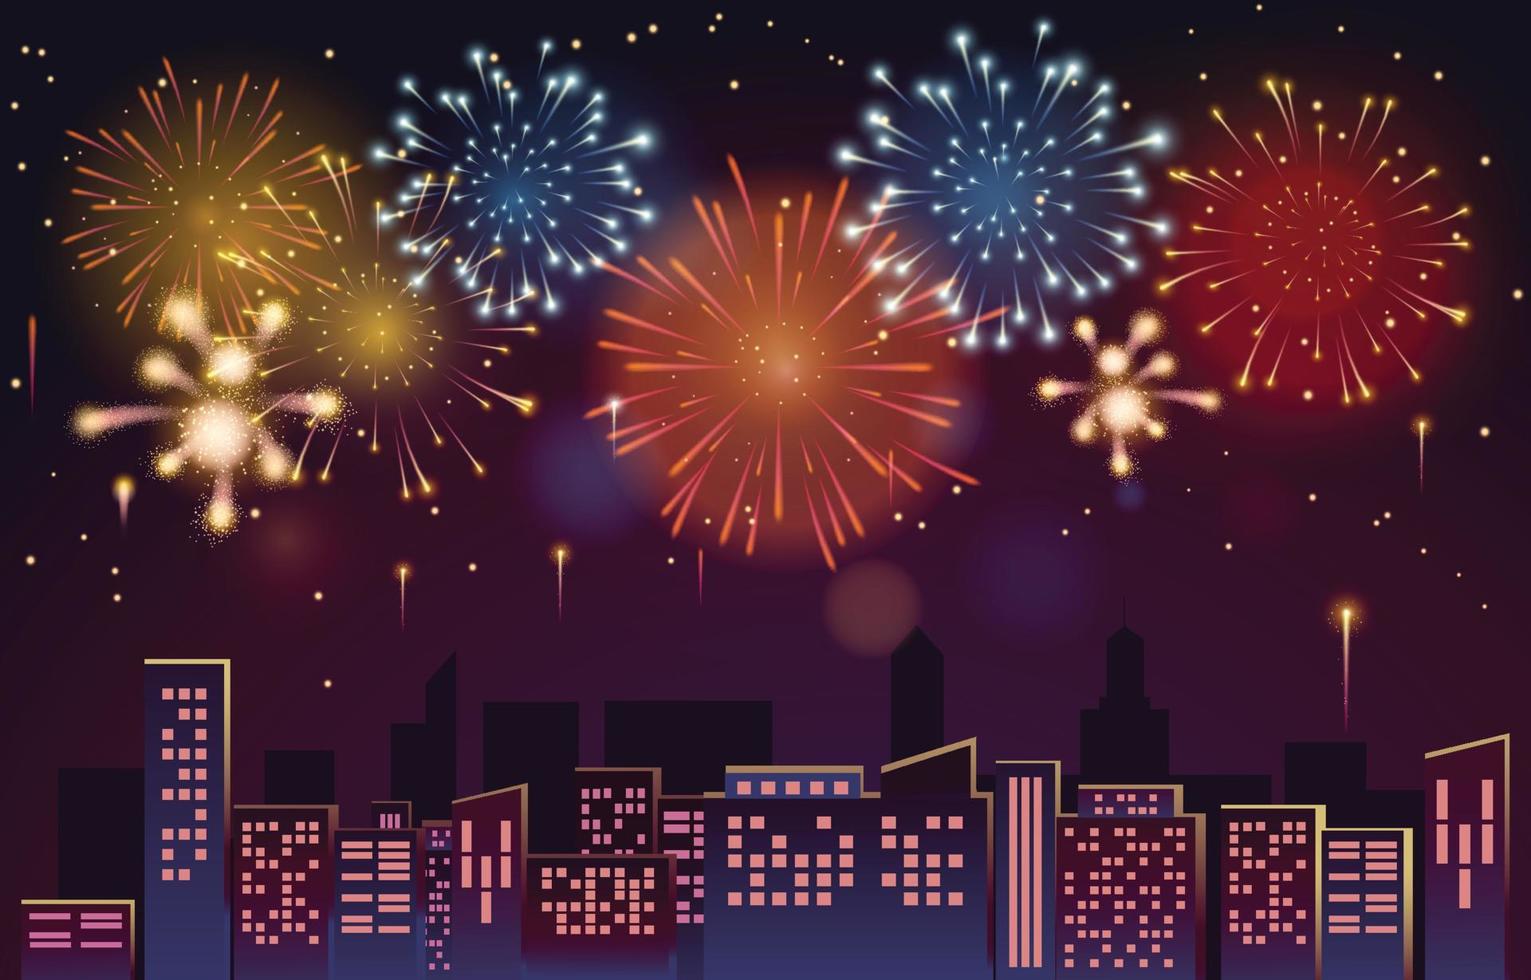 New Year Eve With Fireworks in The City vector